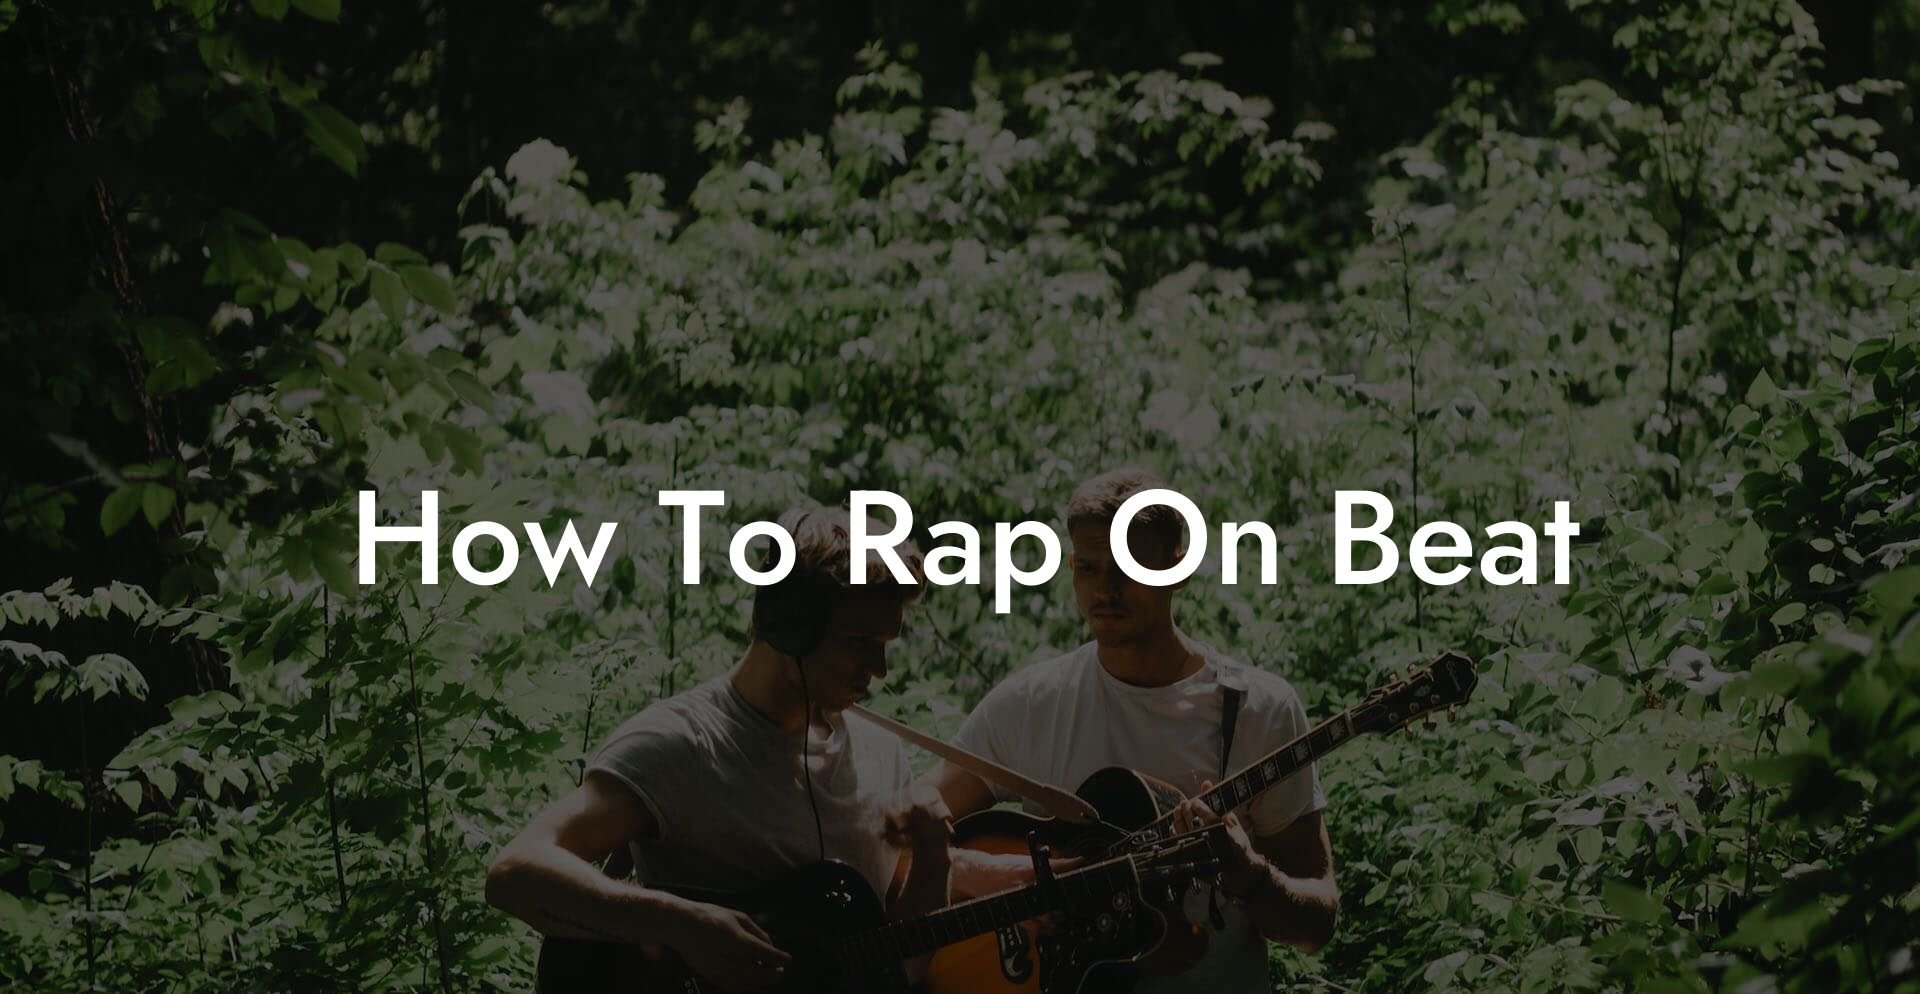 how to rap on beat lyric assistant